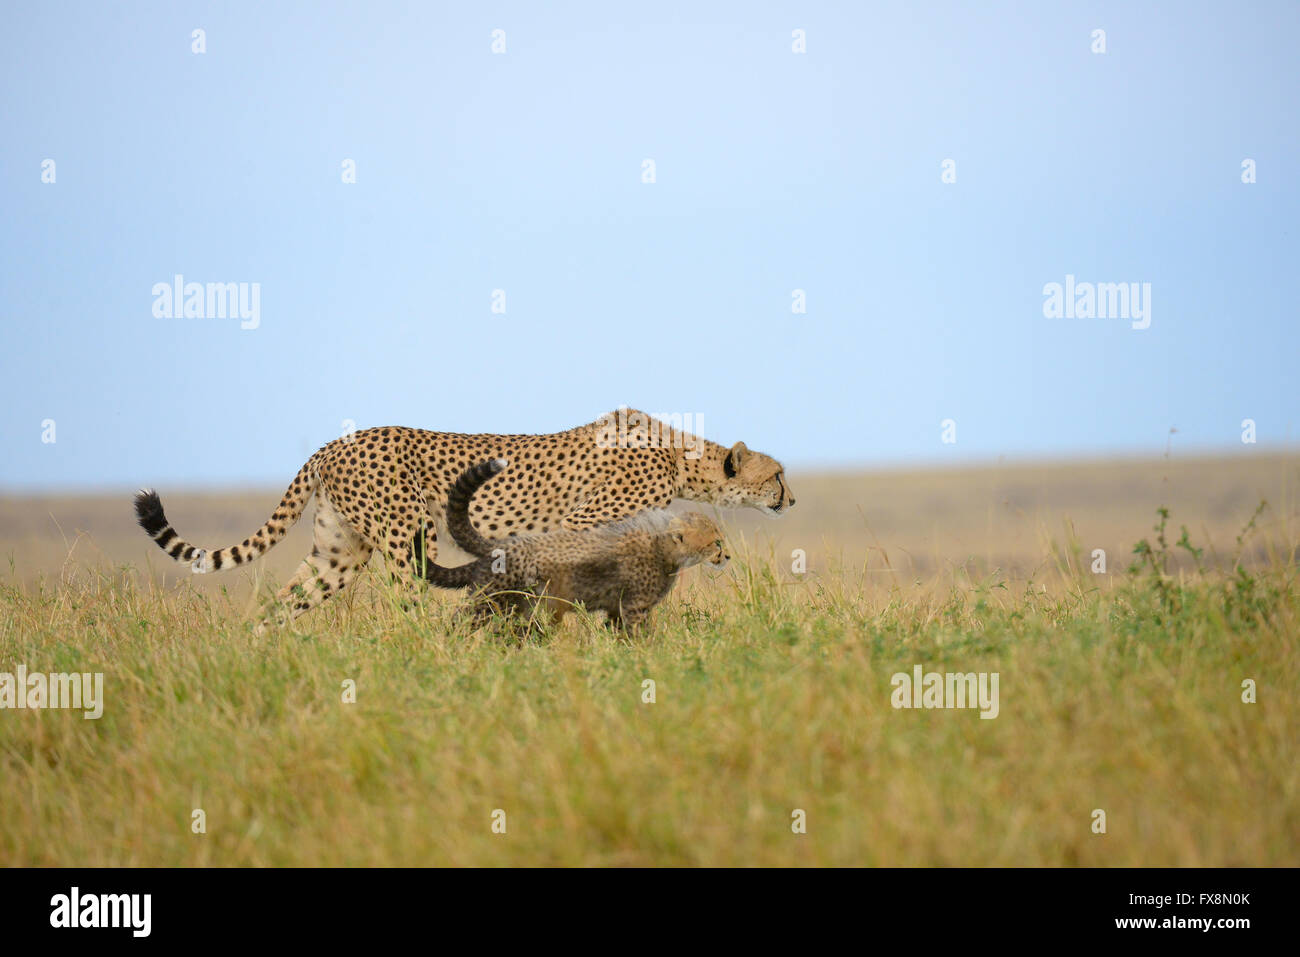 Low angle shot of a Wild cheetah mother with her cubs, walking in the grasslands of Masai Mara in Kenya, Africa Stock Photo